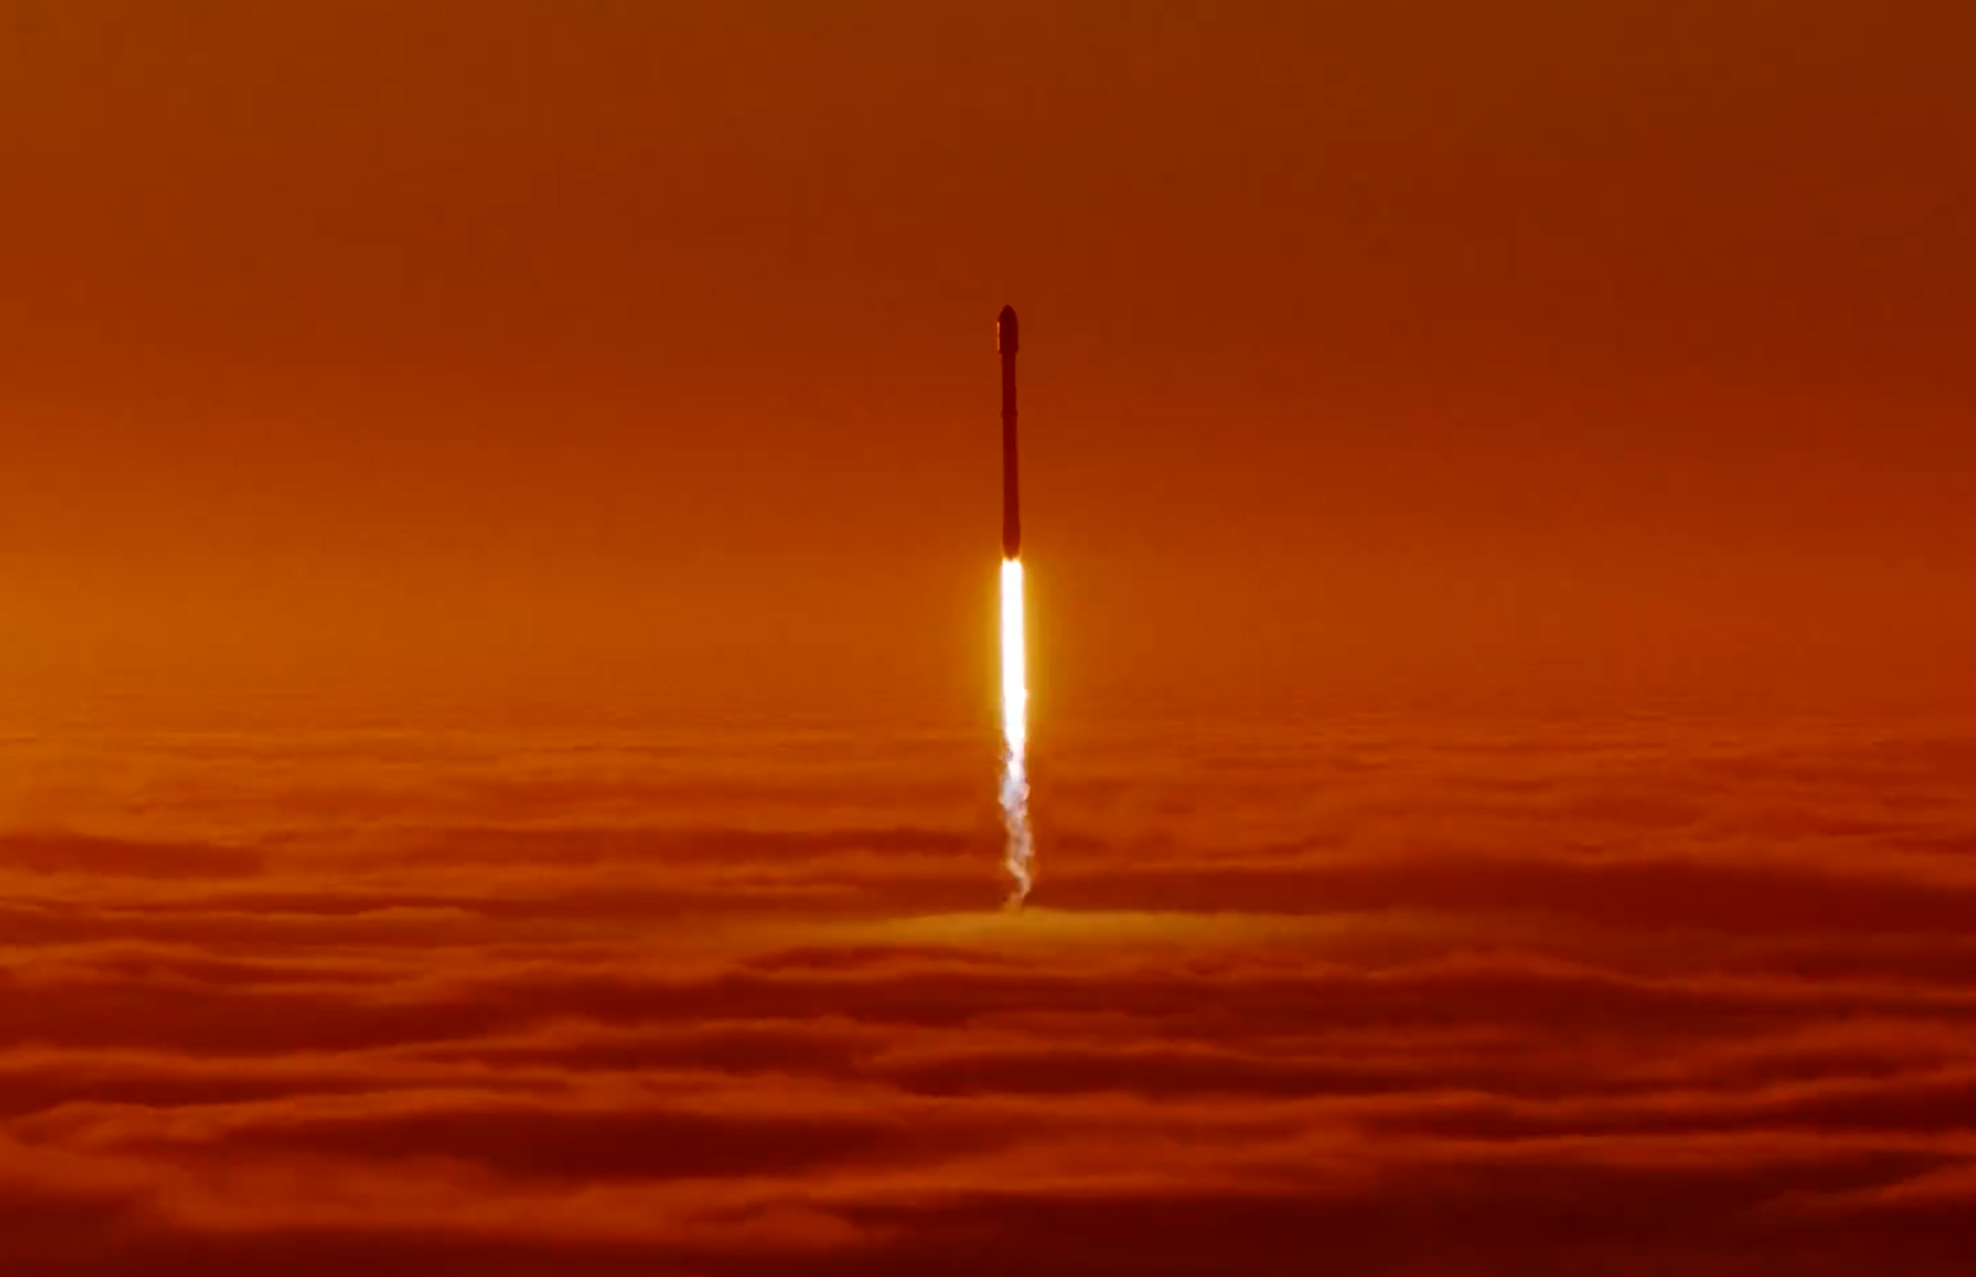 Incredibly exciting rocket launch against the orange sky: video